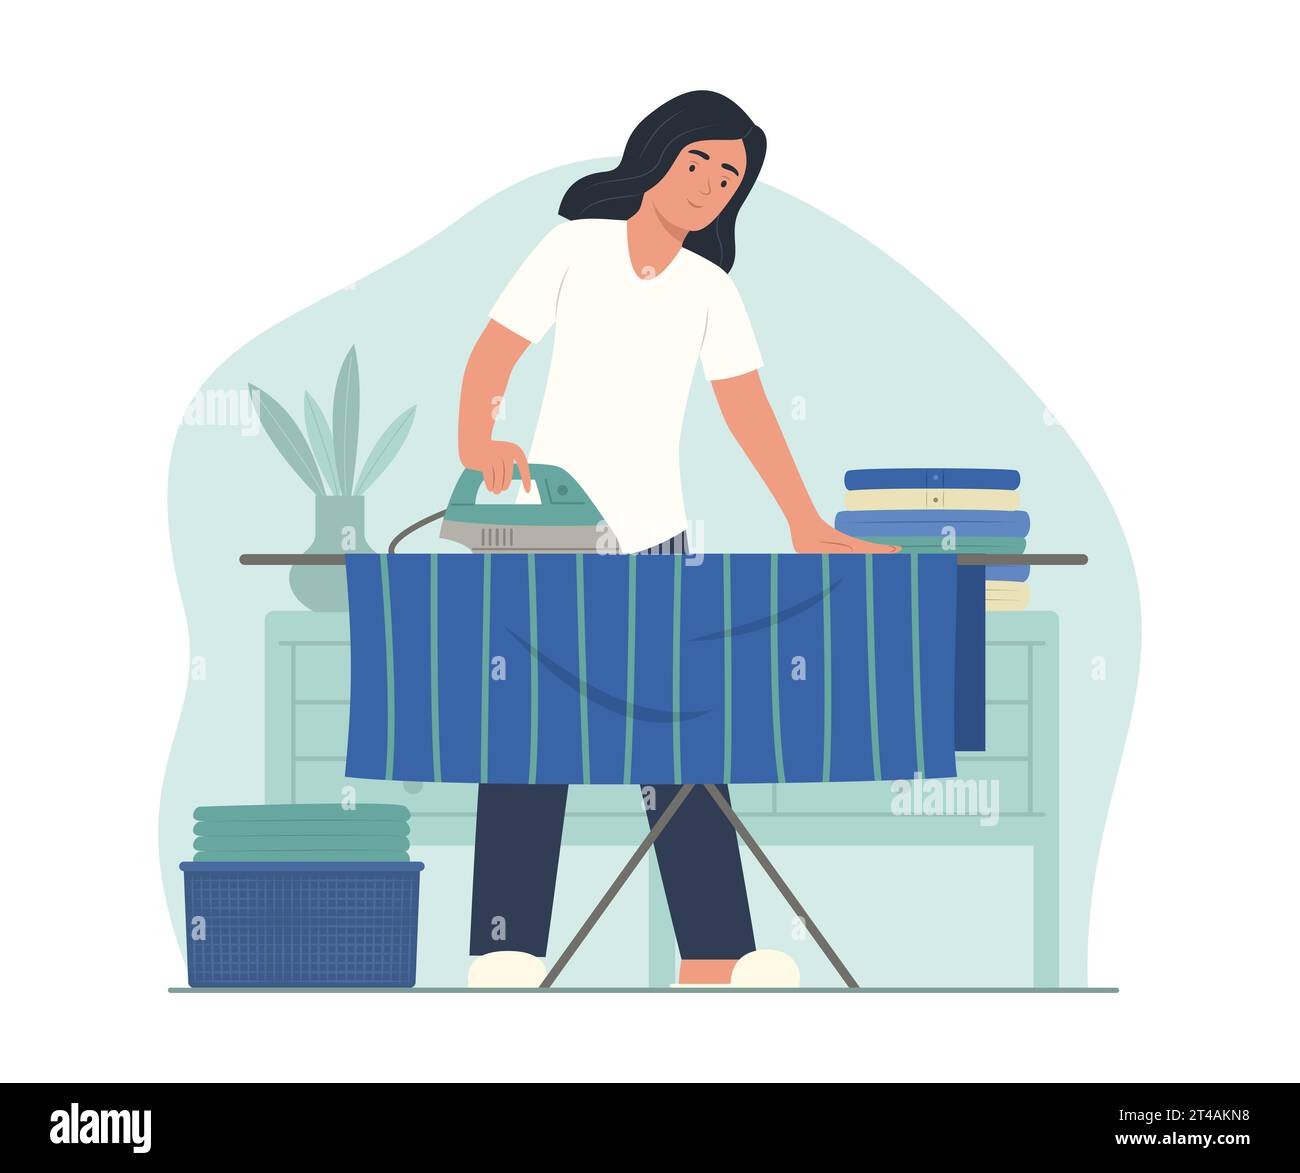 Woman Ironing Clothes with Electric Iron at Home for Housework Concept Illustration Stock Vector